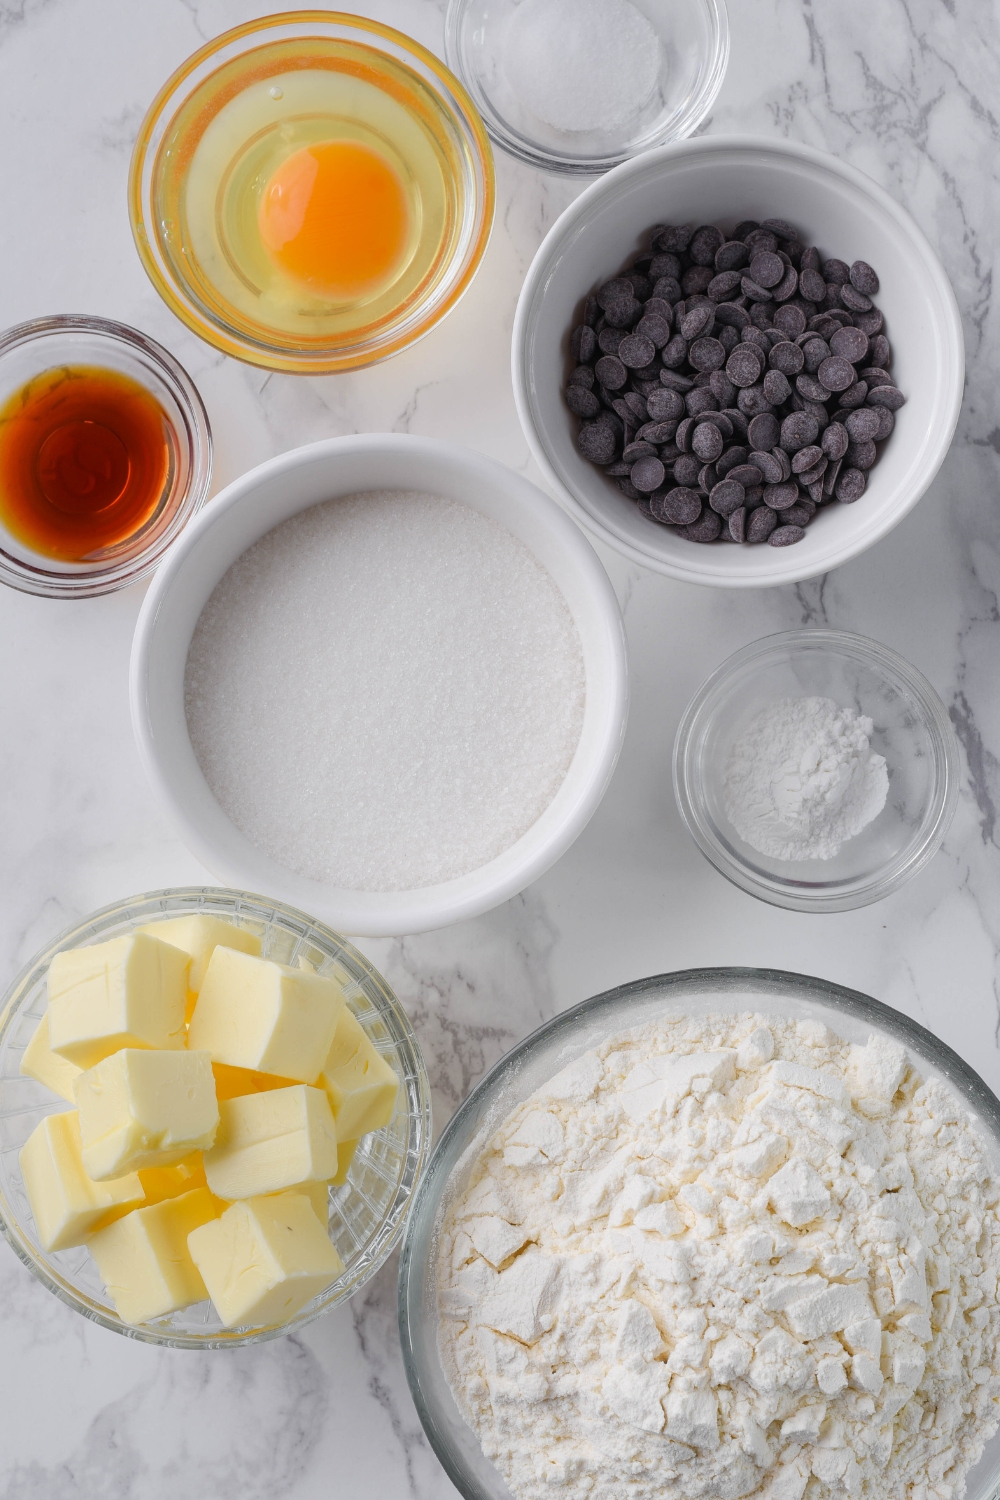 A countertop with multiple bowls with ingredients like flour, butter, sugar, baking powder, vanilla extract, egg, salt, and chocolate chips.